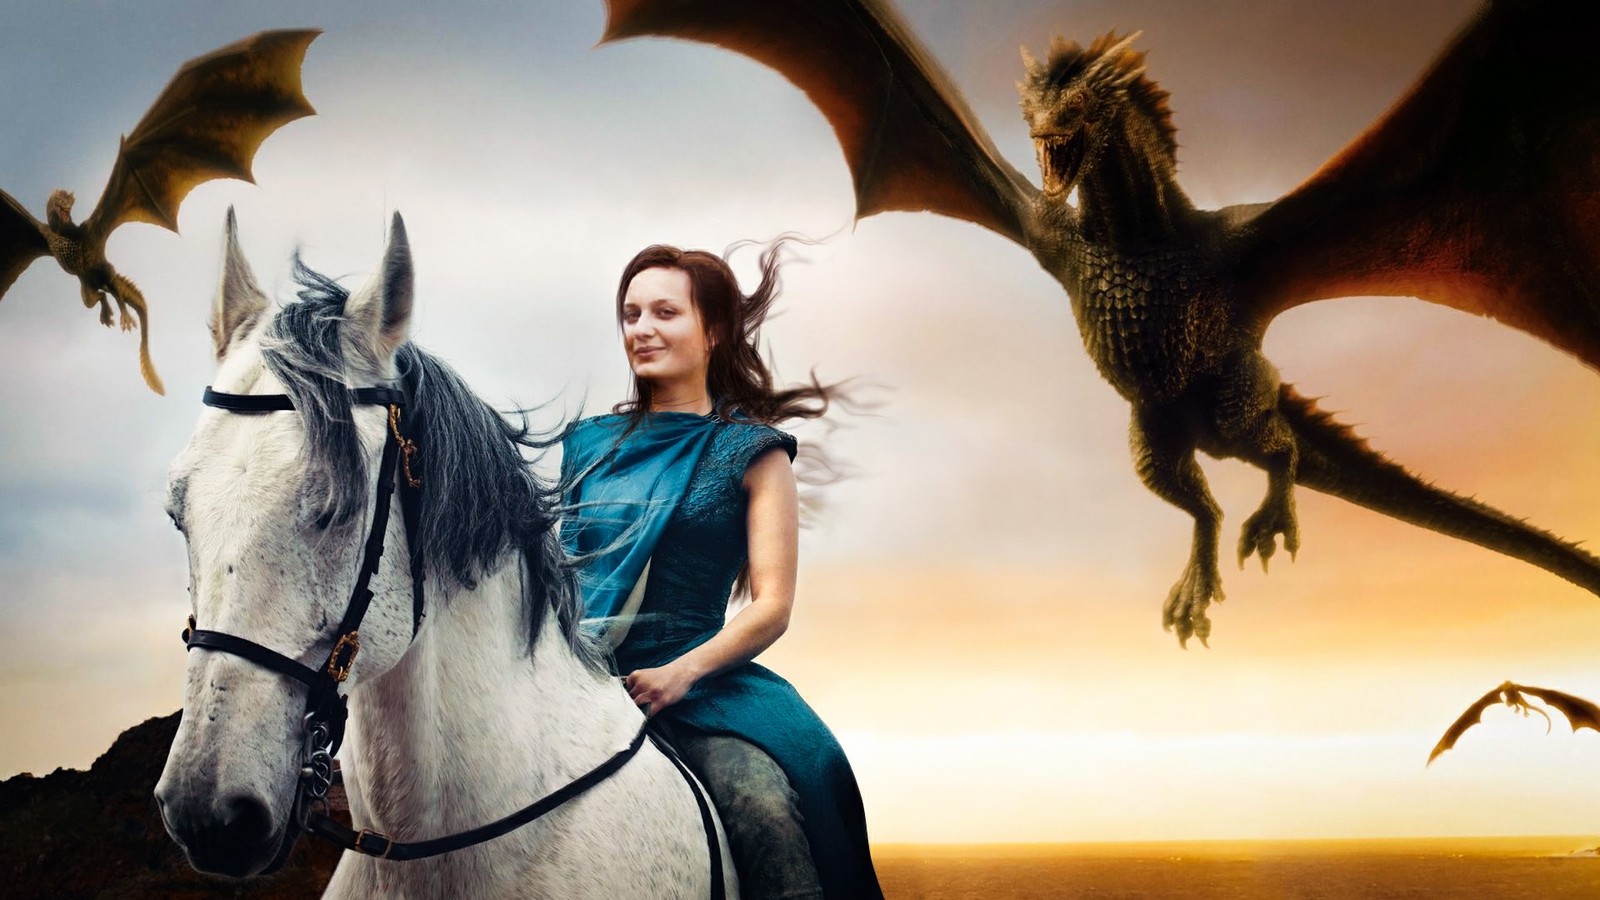 A little bit of photoshop and you are the mother of dragons. - My, Game of Thrones, Photoshop master, Photoshop